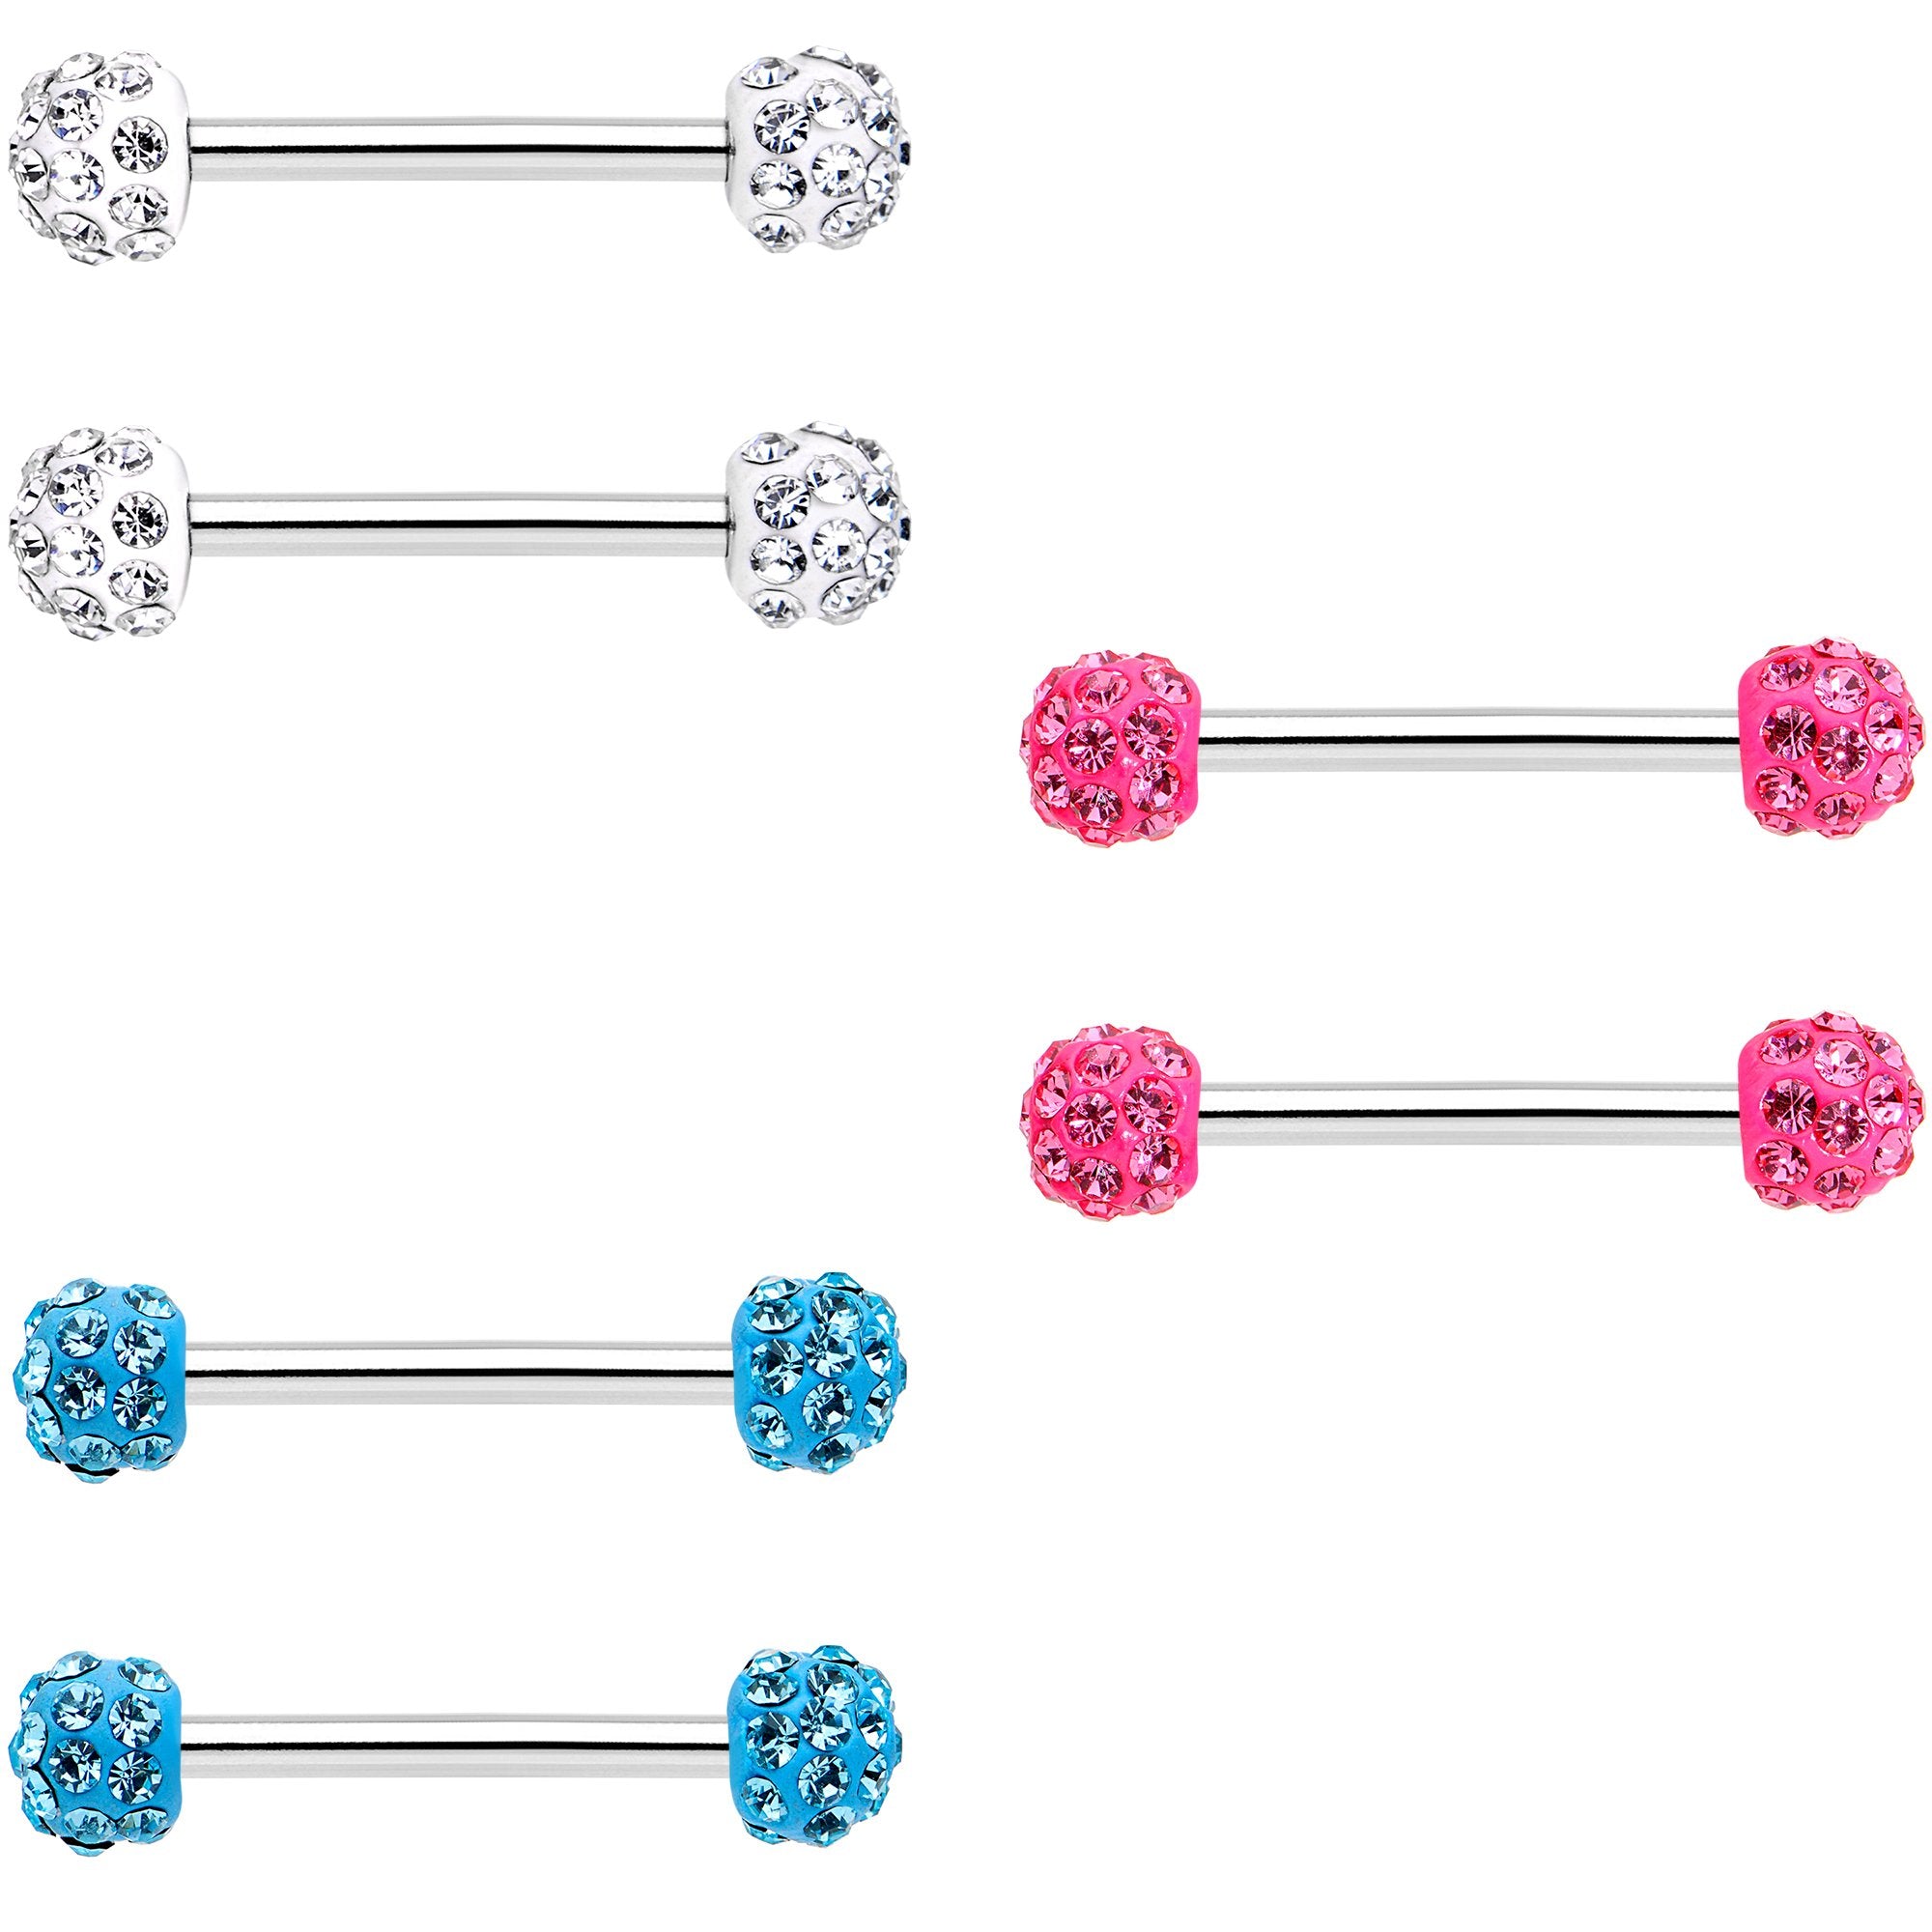 14 Gauge 9/16 All About Fun Barbell Nipple Ring Pack Set of 6